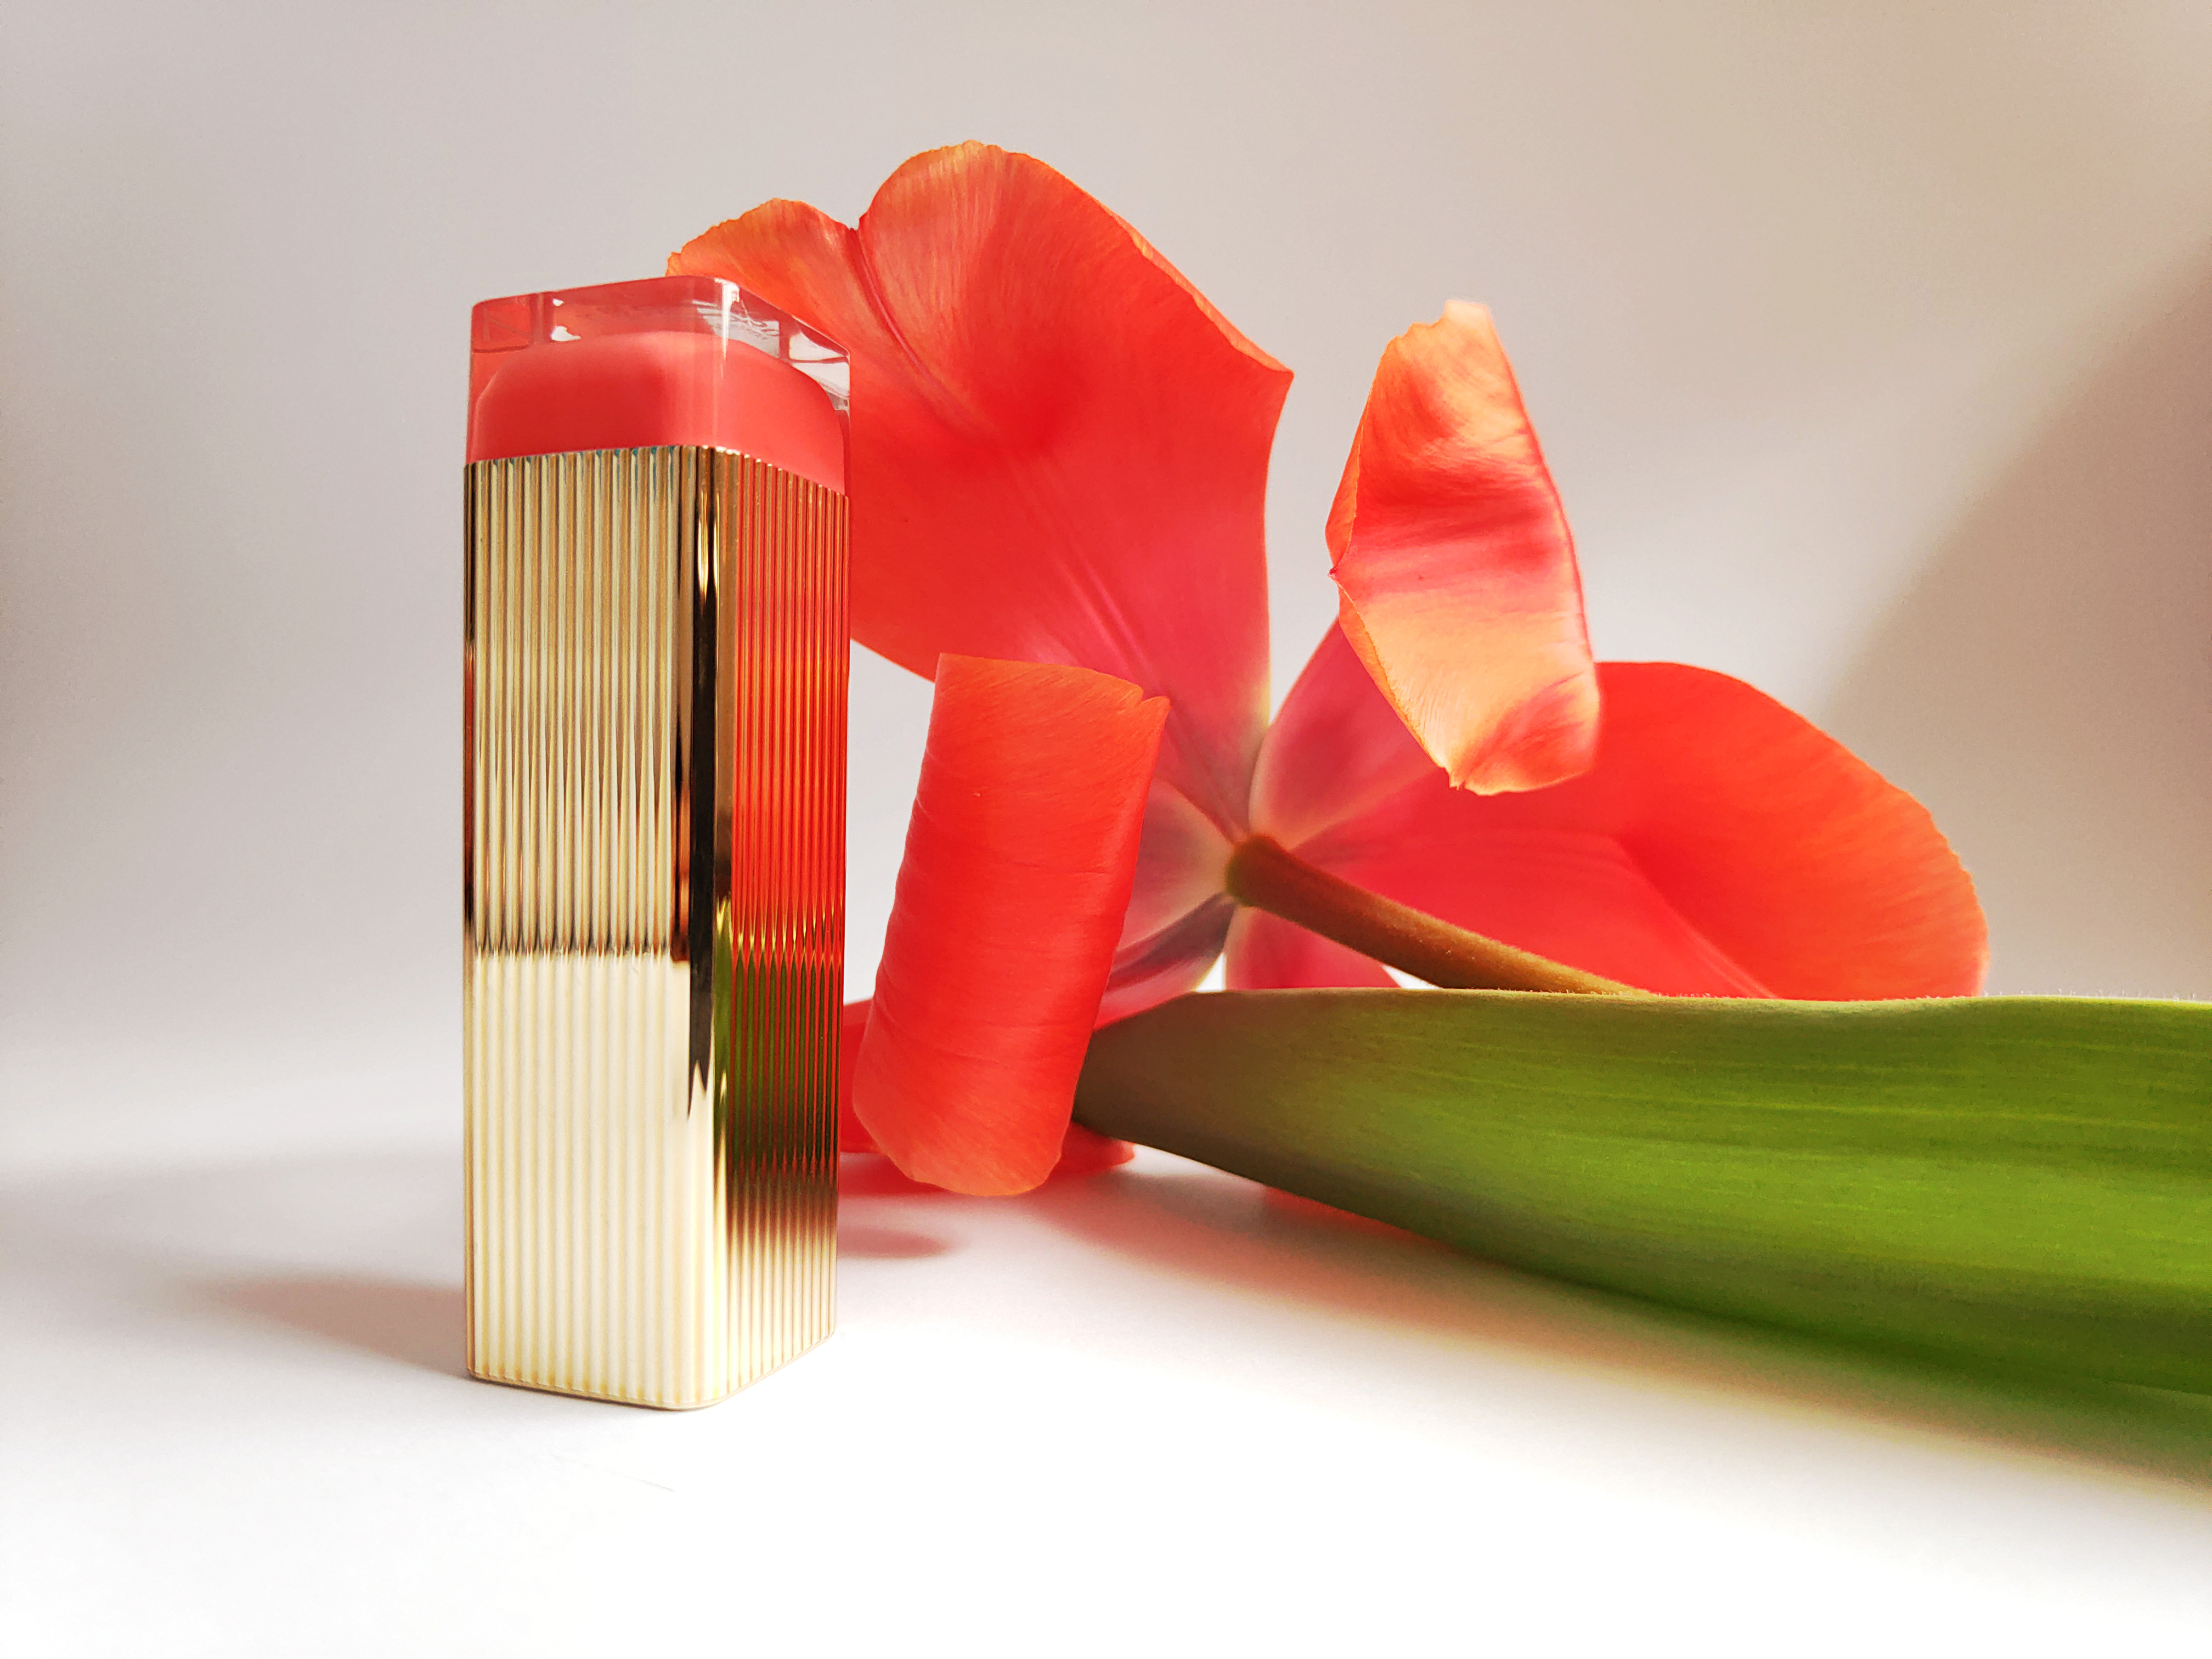 Golden packaging of Max Factor Colour Elixir Lipstick in 050 Pink Brandy with closed cap, next to the red tulip with completely opened and curly petals.